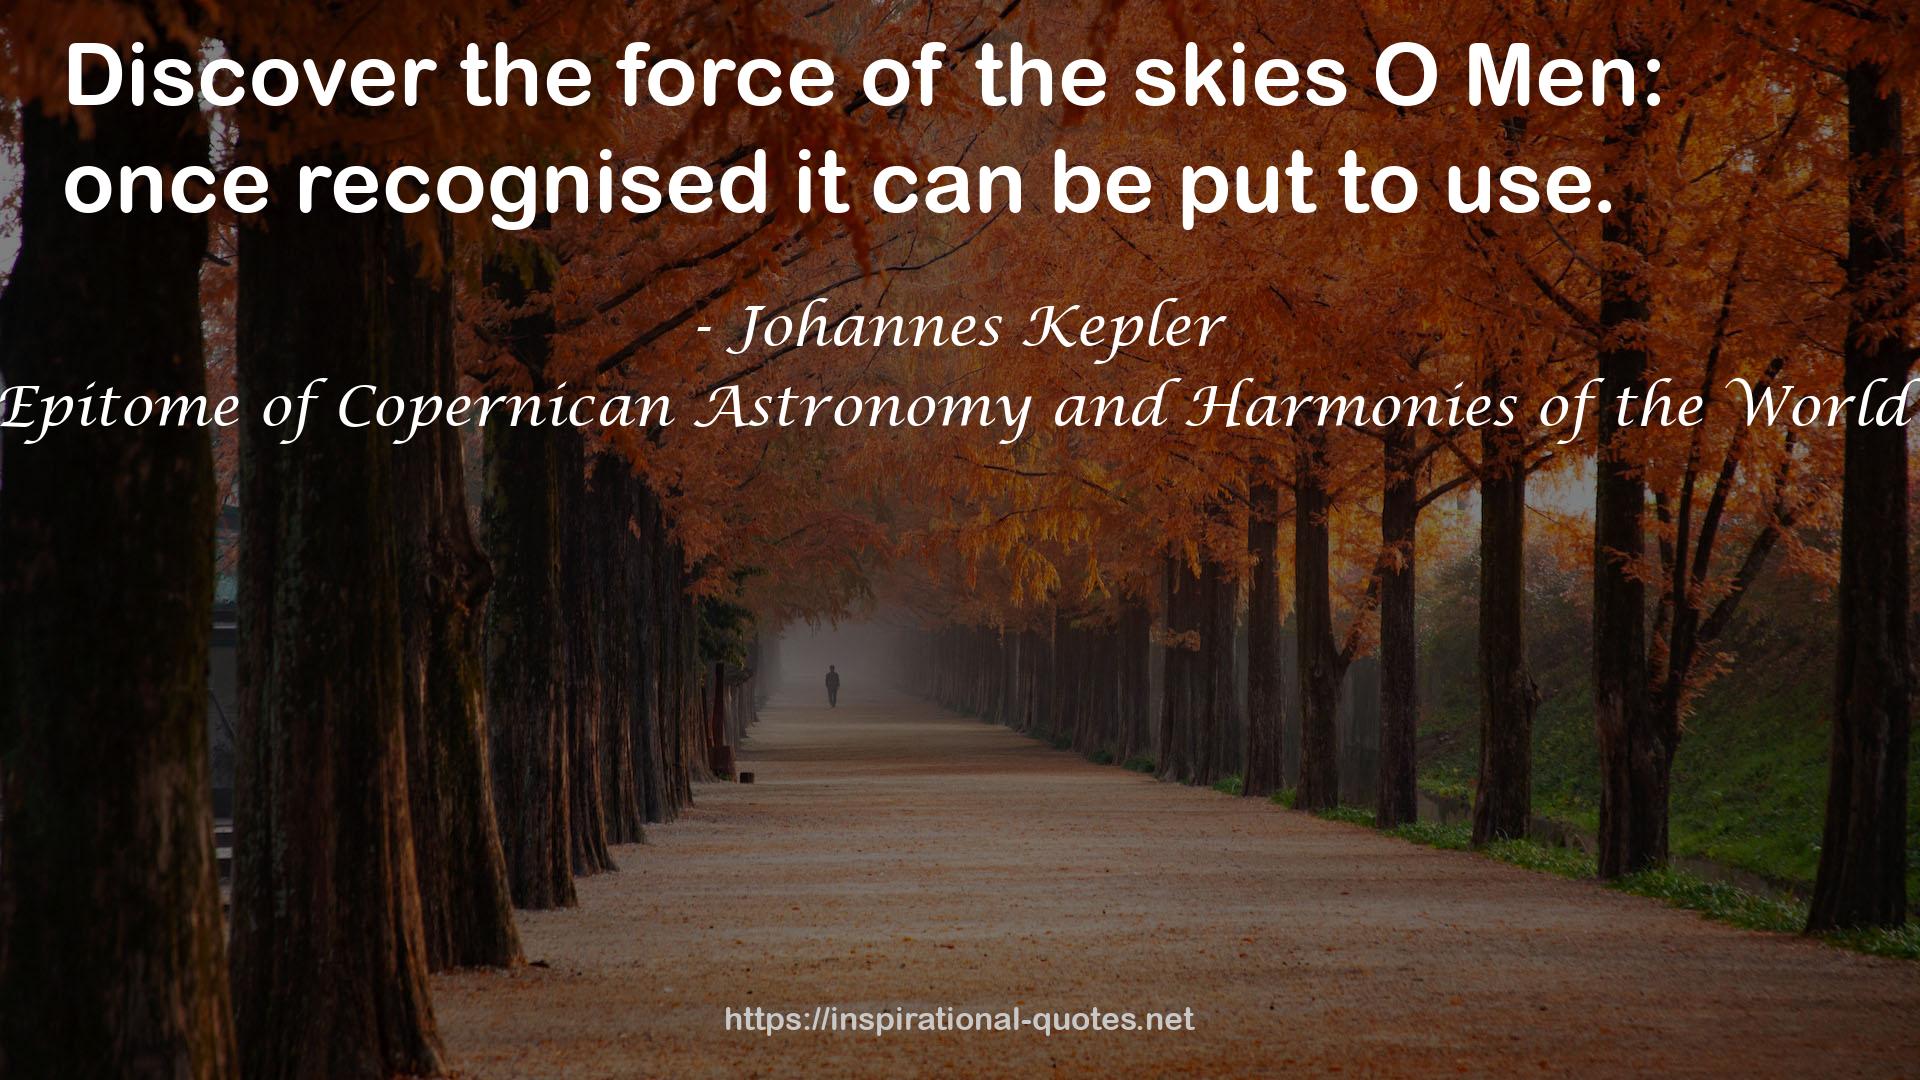 Epitome of Copernican Astronomy and Harmonies of the World QUOTES